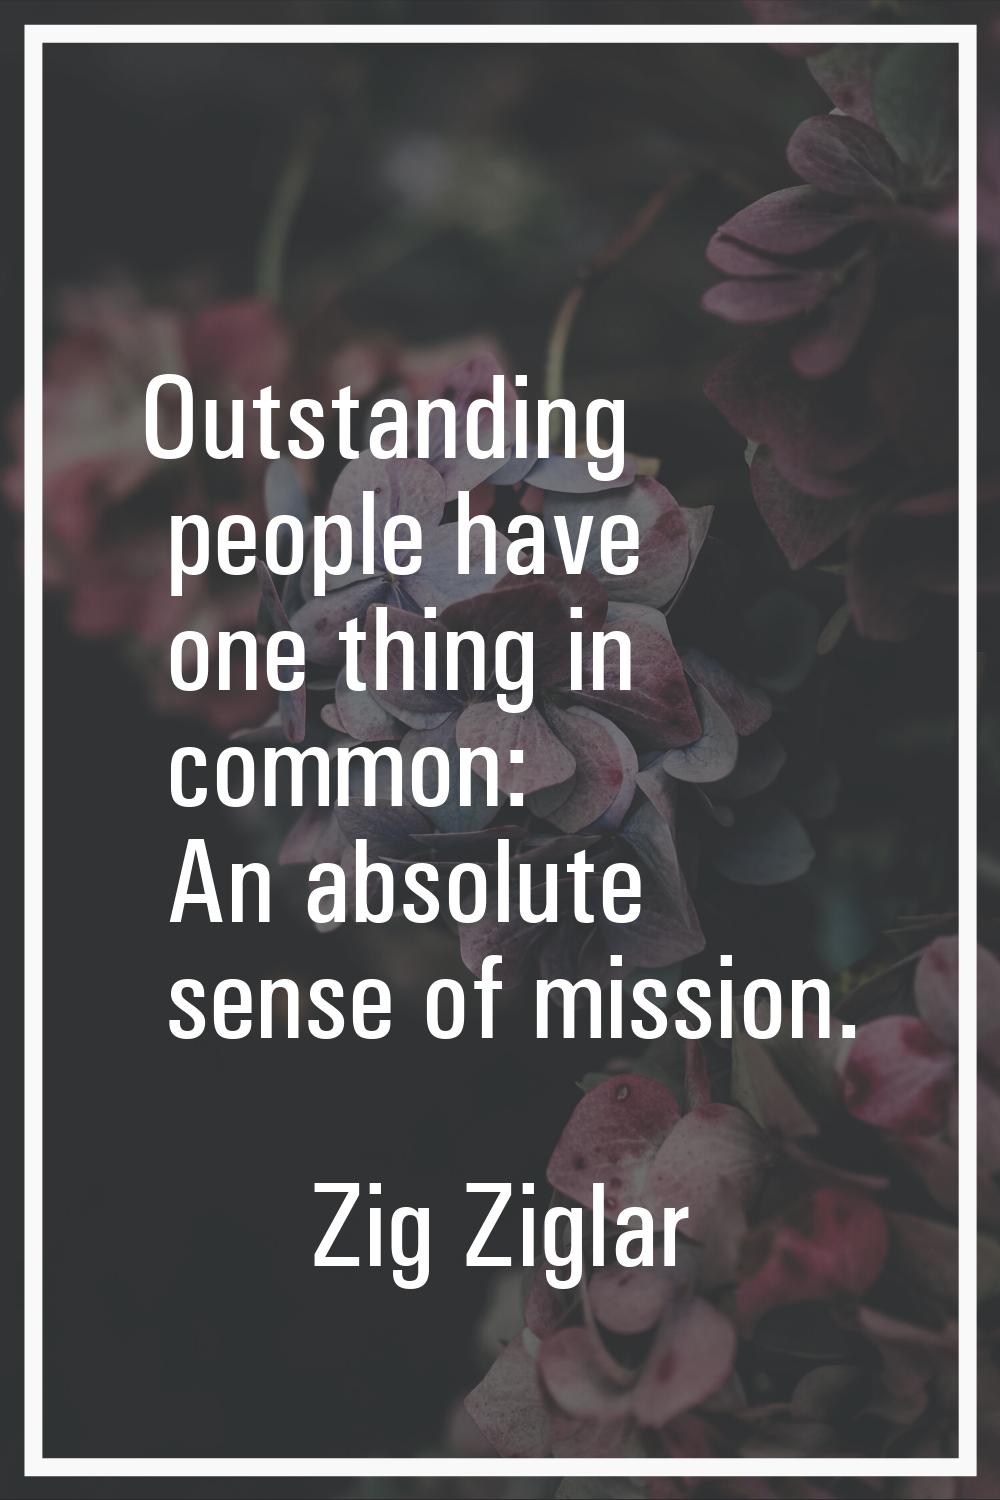 Outstanding people have one thing in common: An absolute sense of mission.